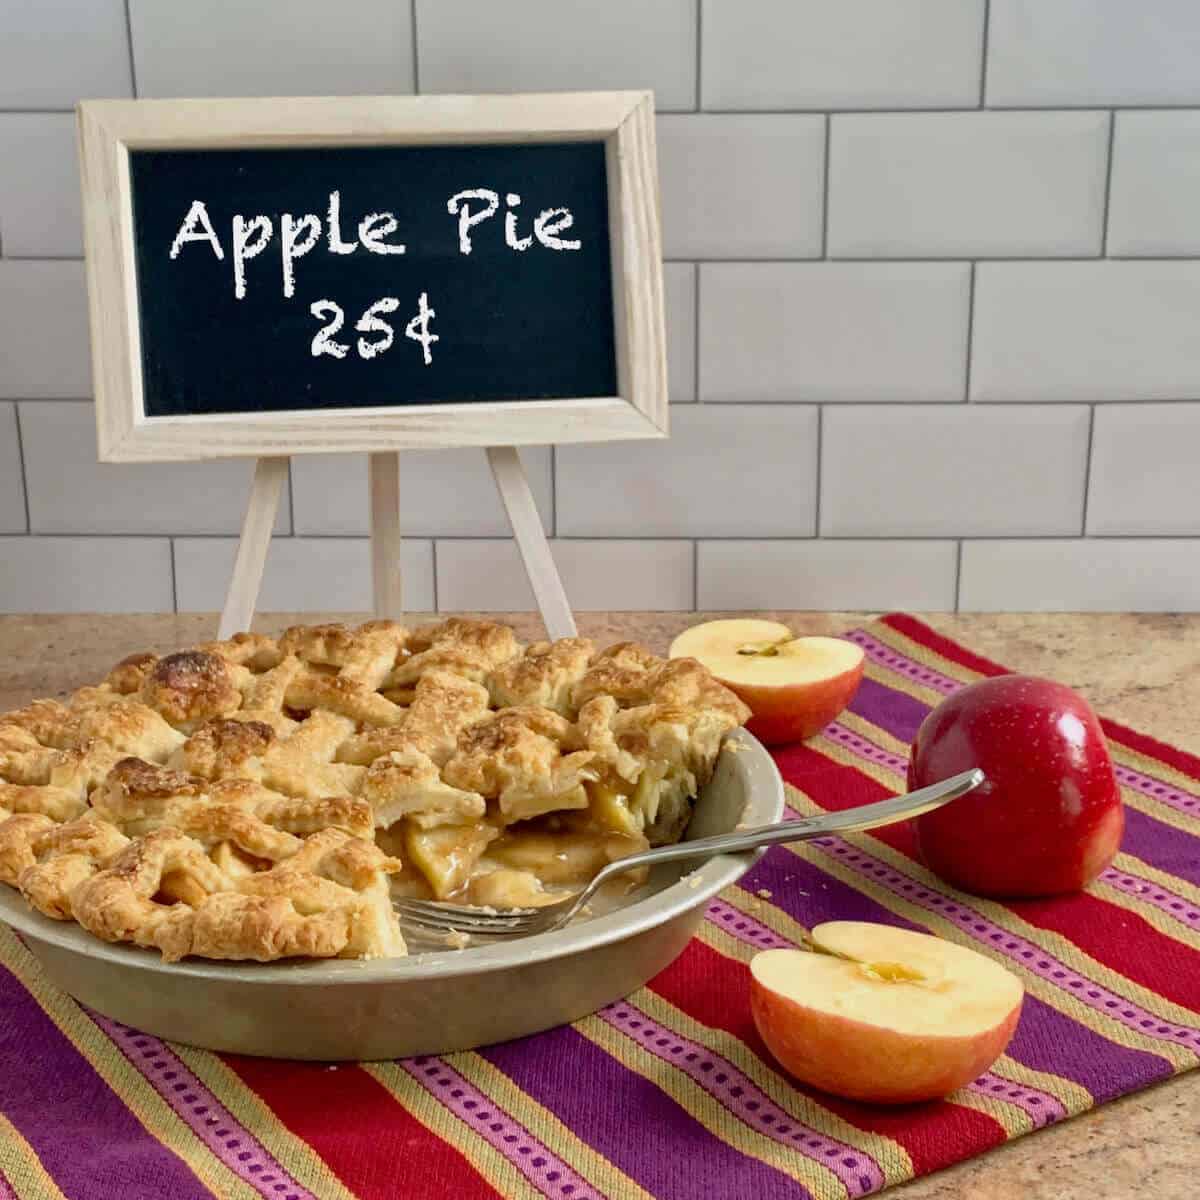 Sliced Apple Pie in pan with fork, apples, & chalkboard sign on a purple striped towel.